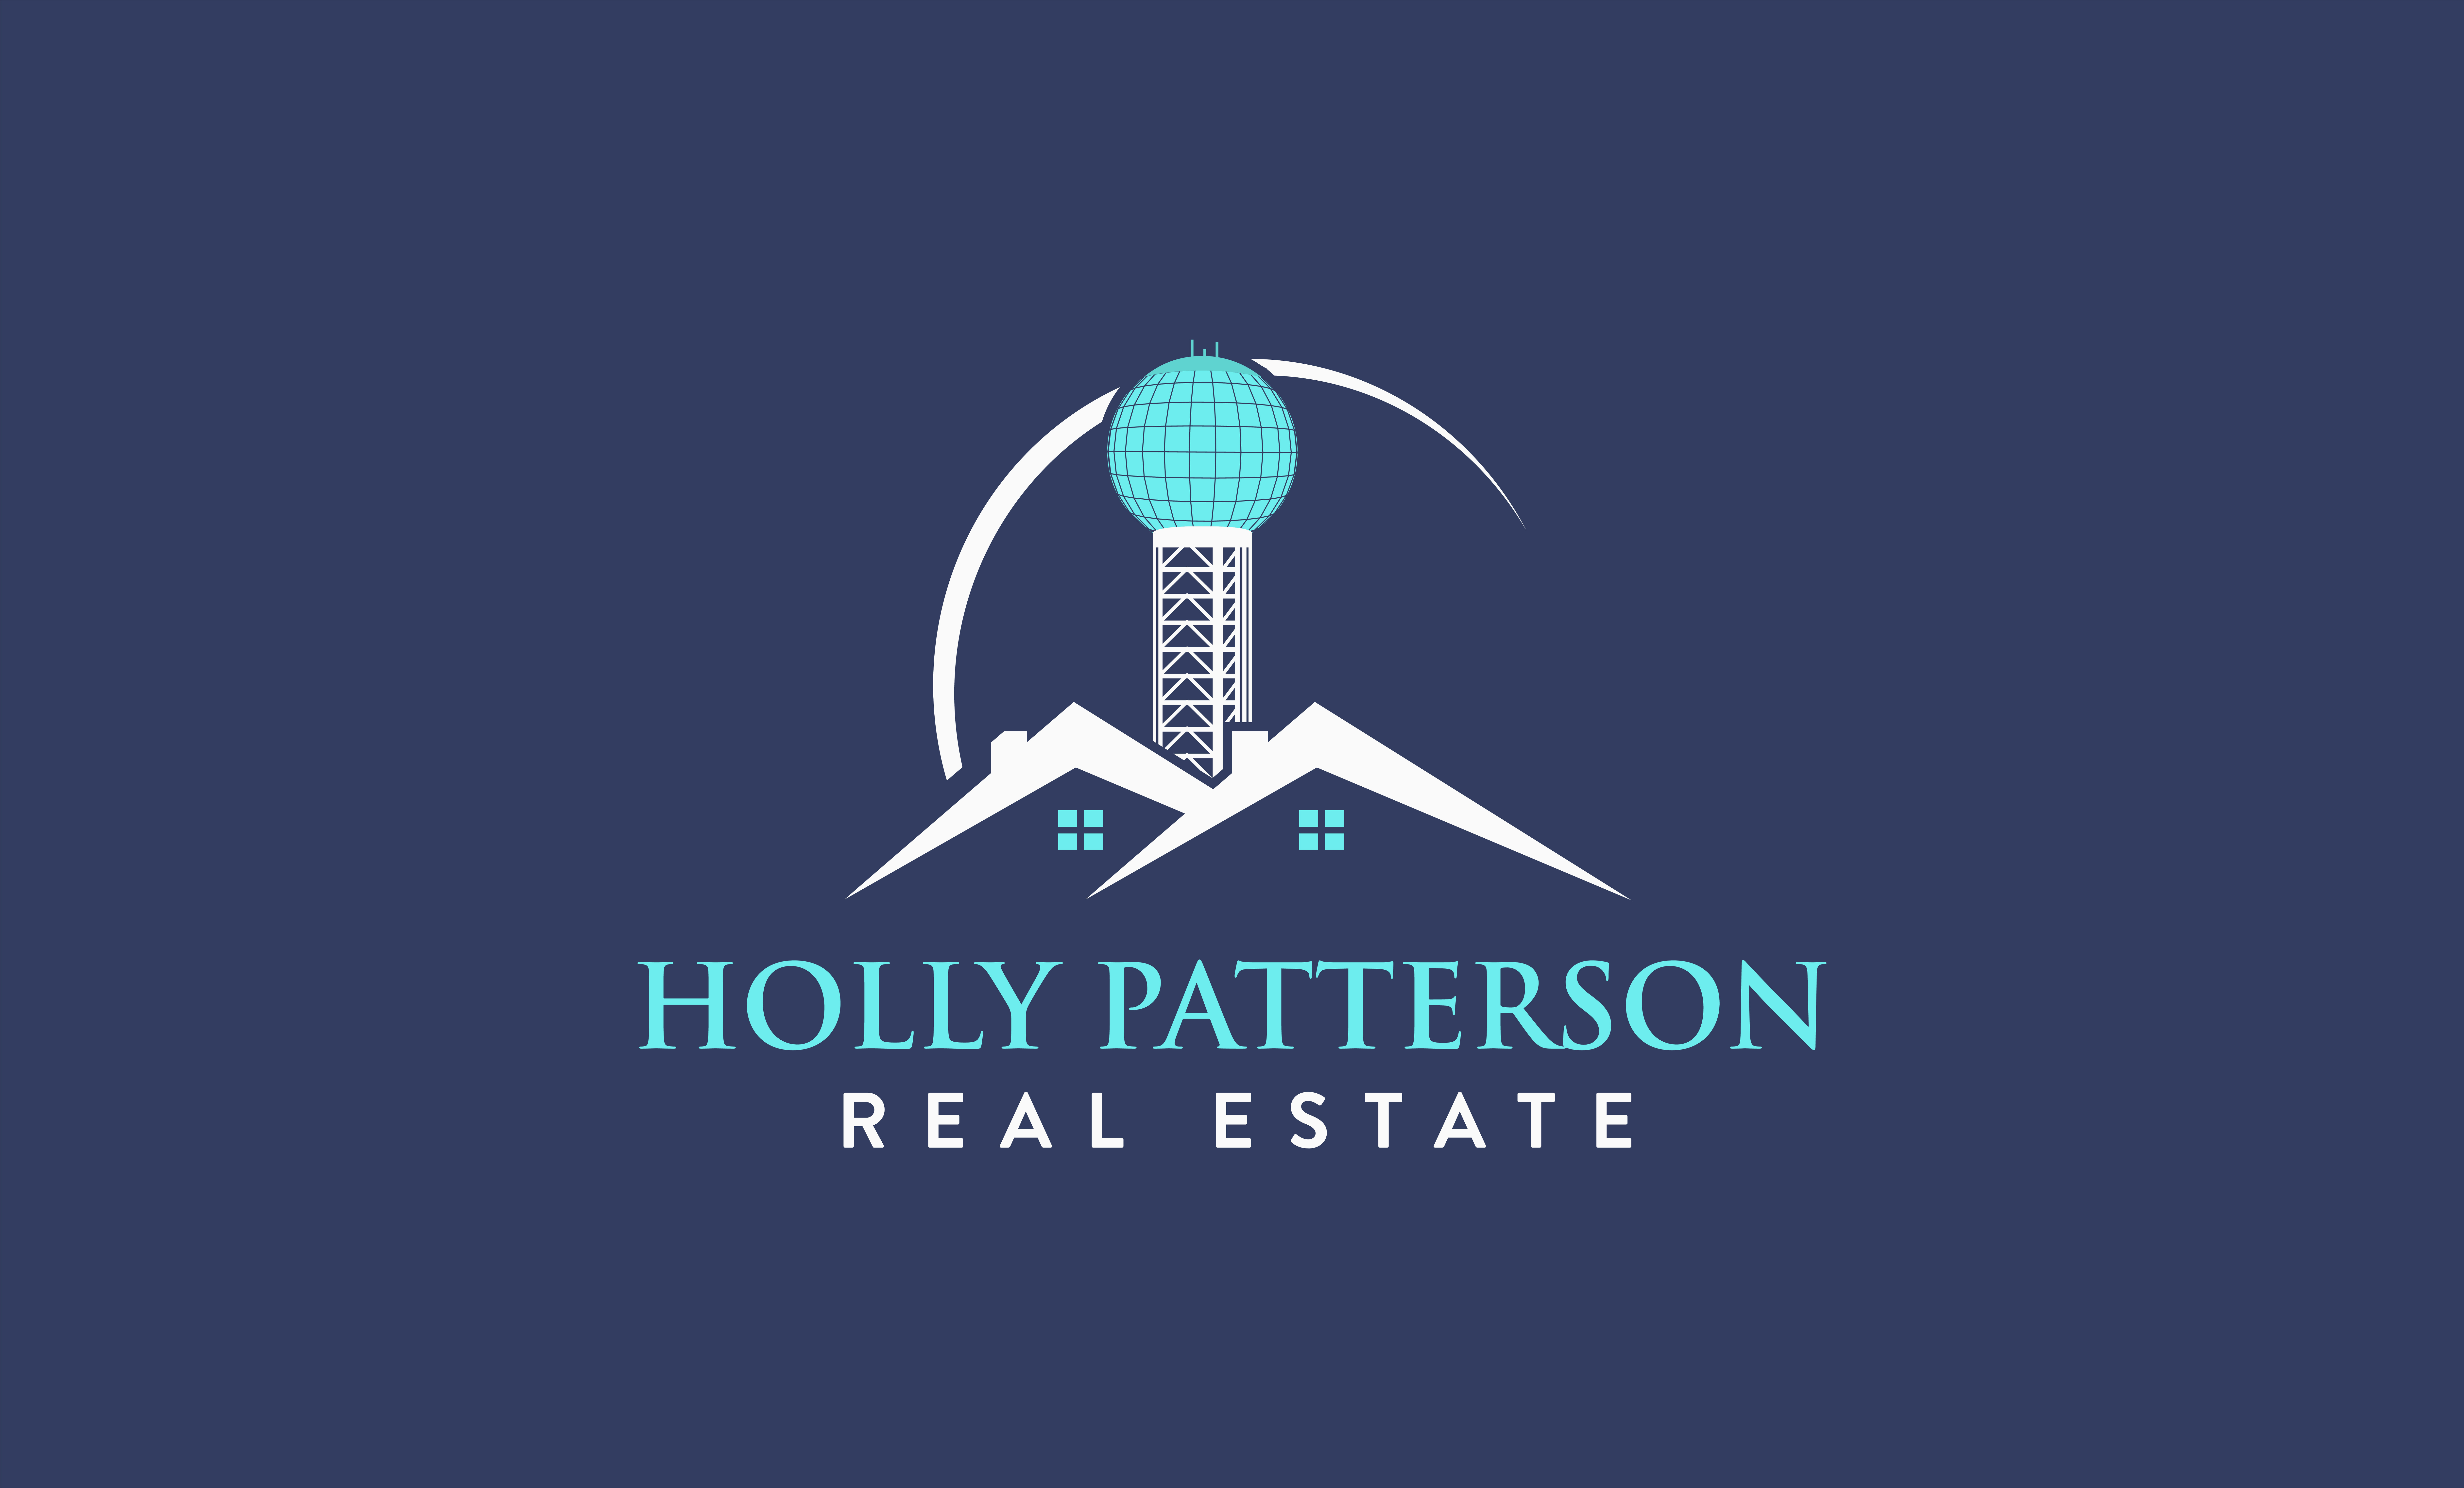 Holly Patterson Real Estate